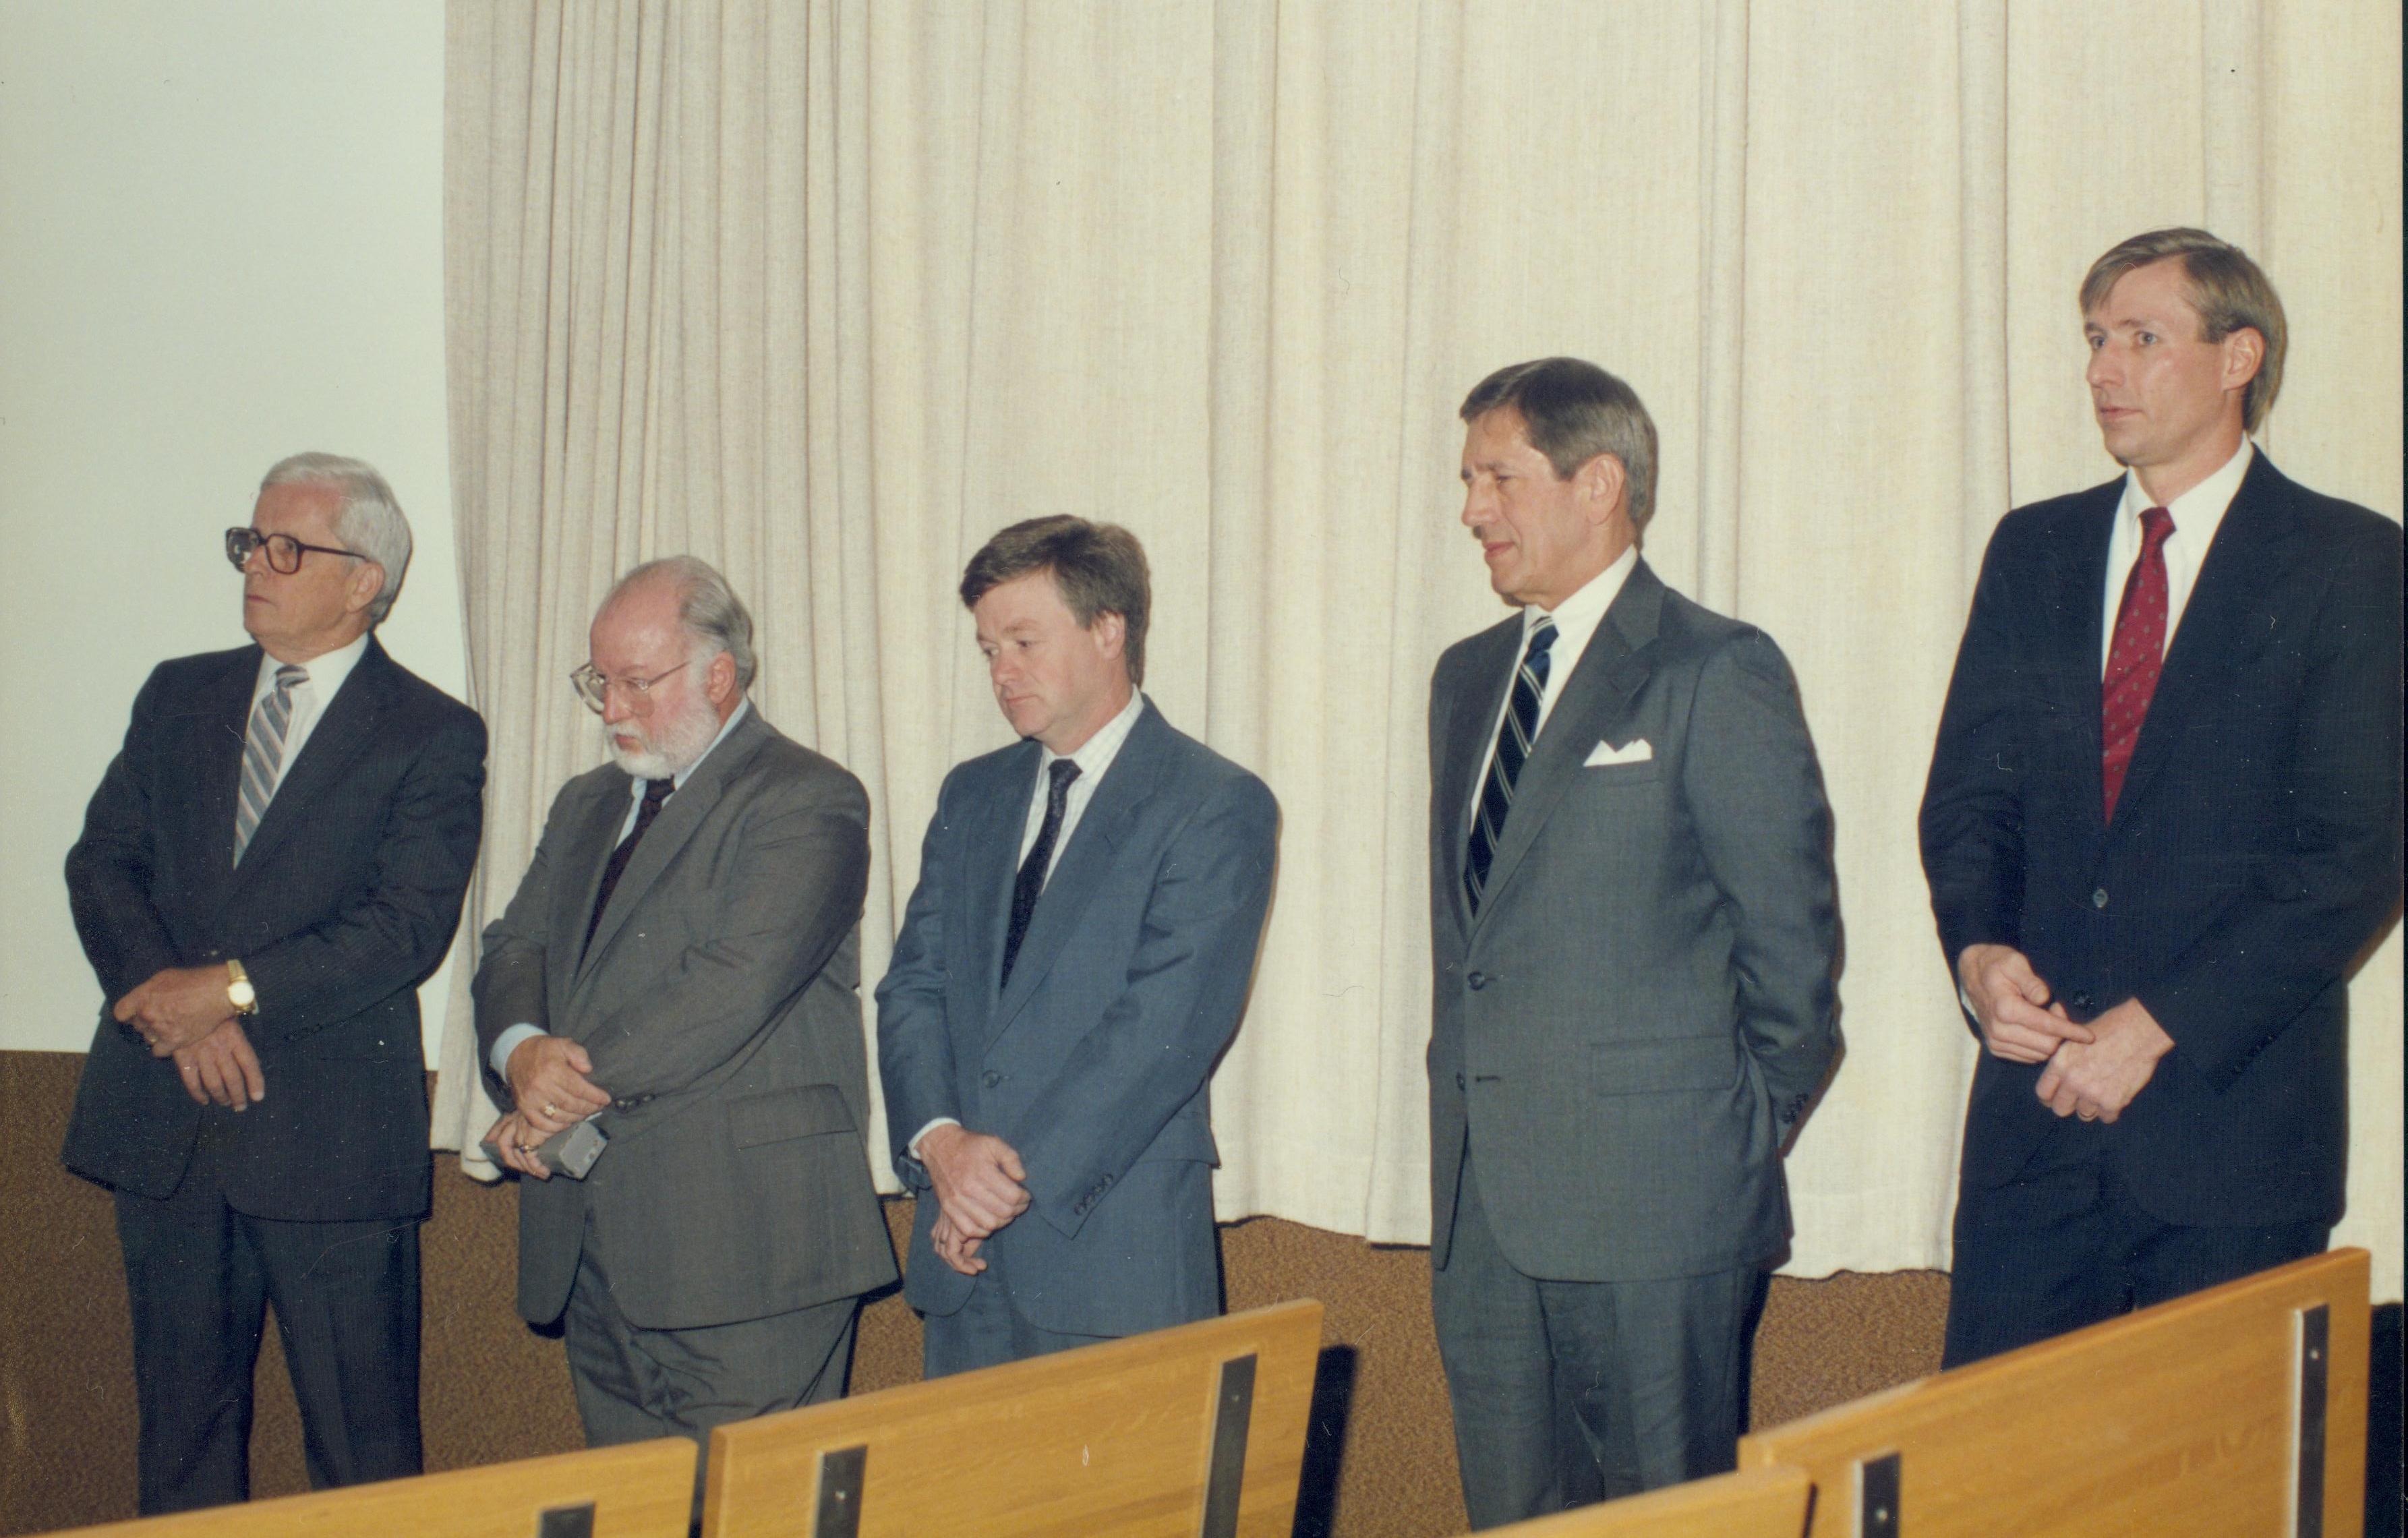 Five men standing in front of curtain. Lincoln Home NHS- Bring Furniture Back Home ceremony, presentation